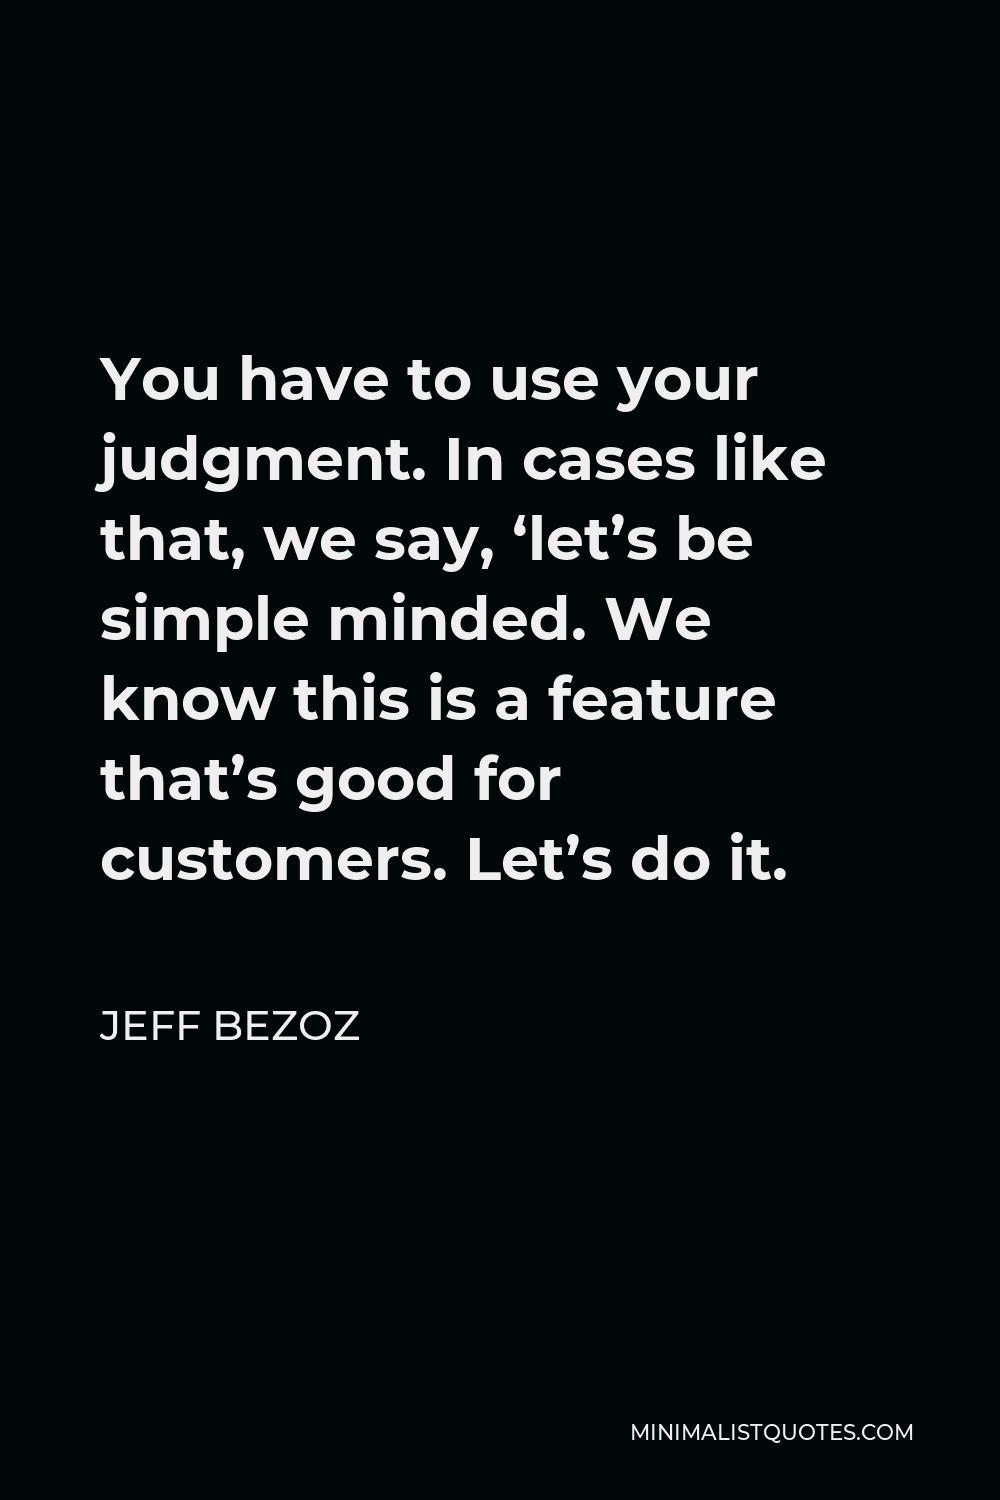 Jeff Bezoz Quote - You have to use your judgment. In cases like that, we say, ‘let’s be simple minded. We know this is a feature that’s good for customers. Let’s do it.